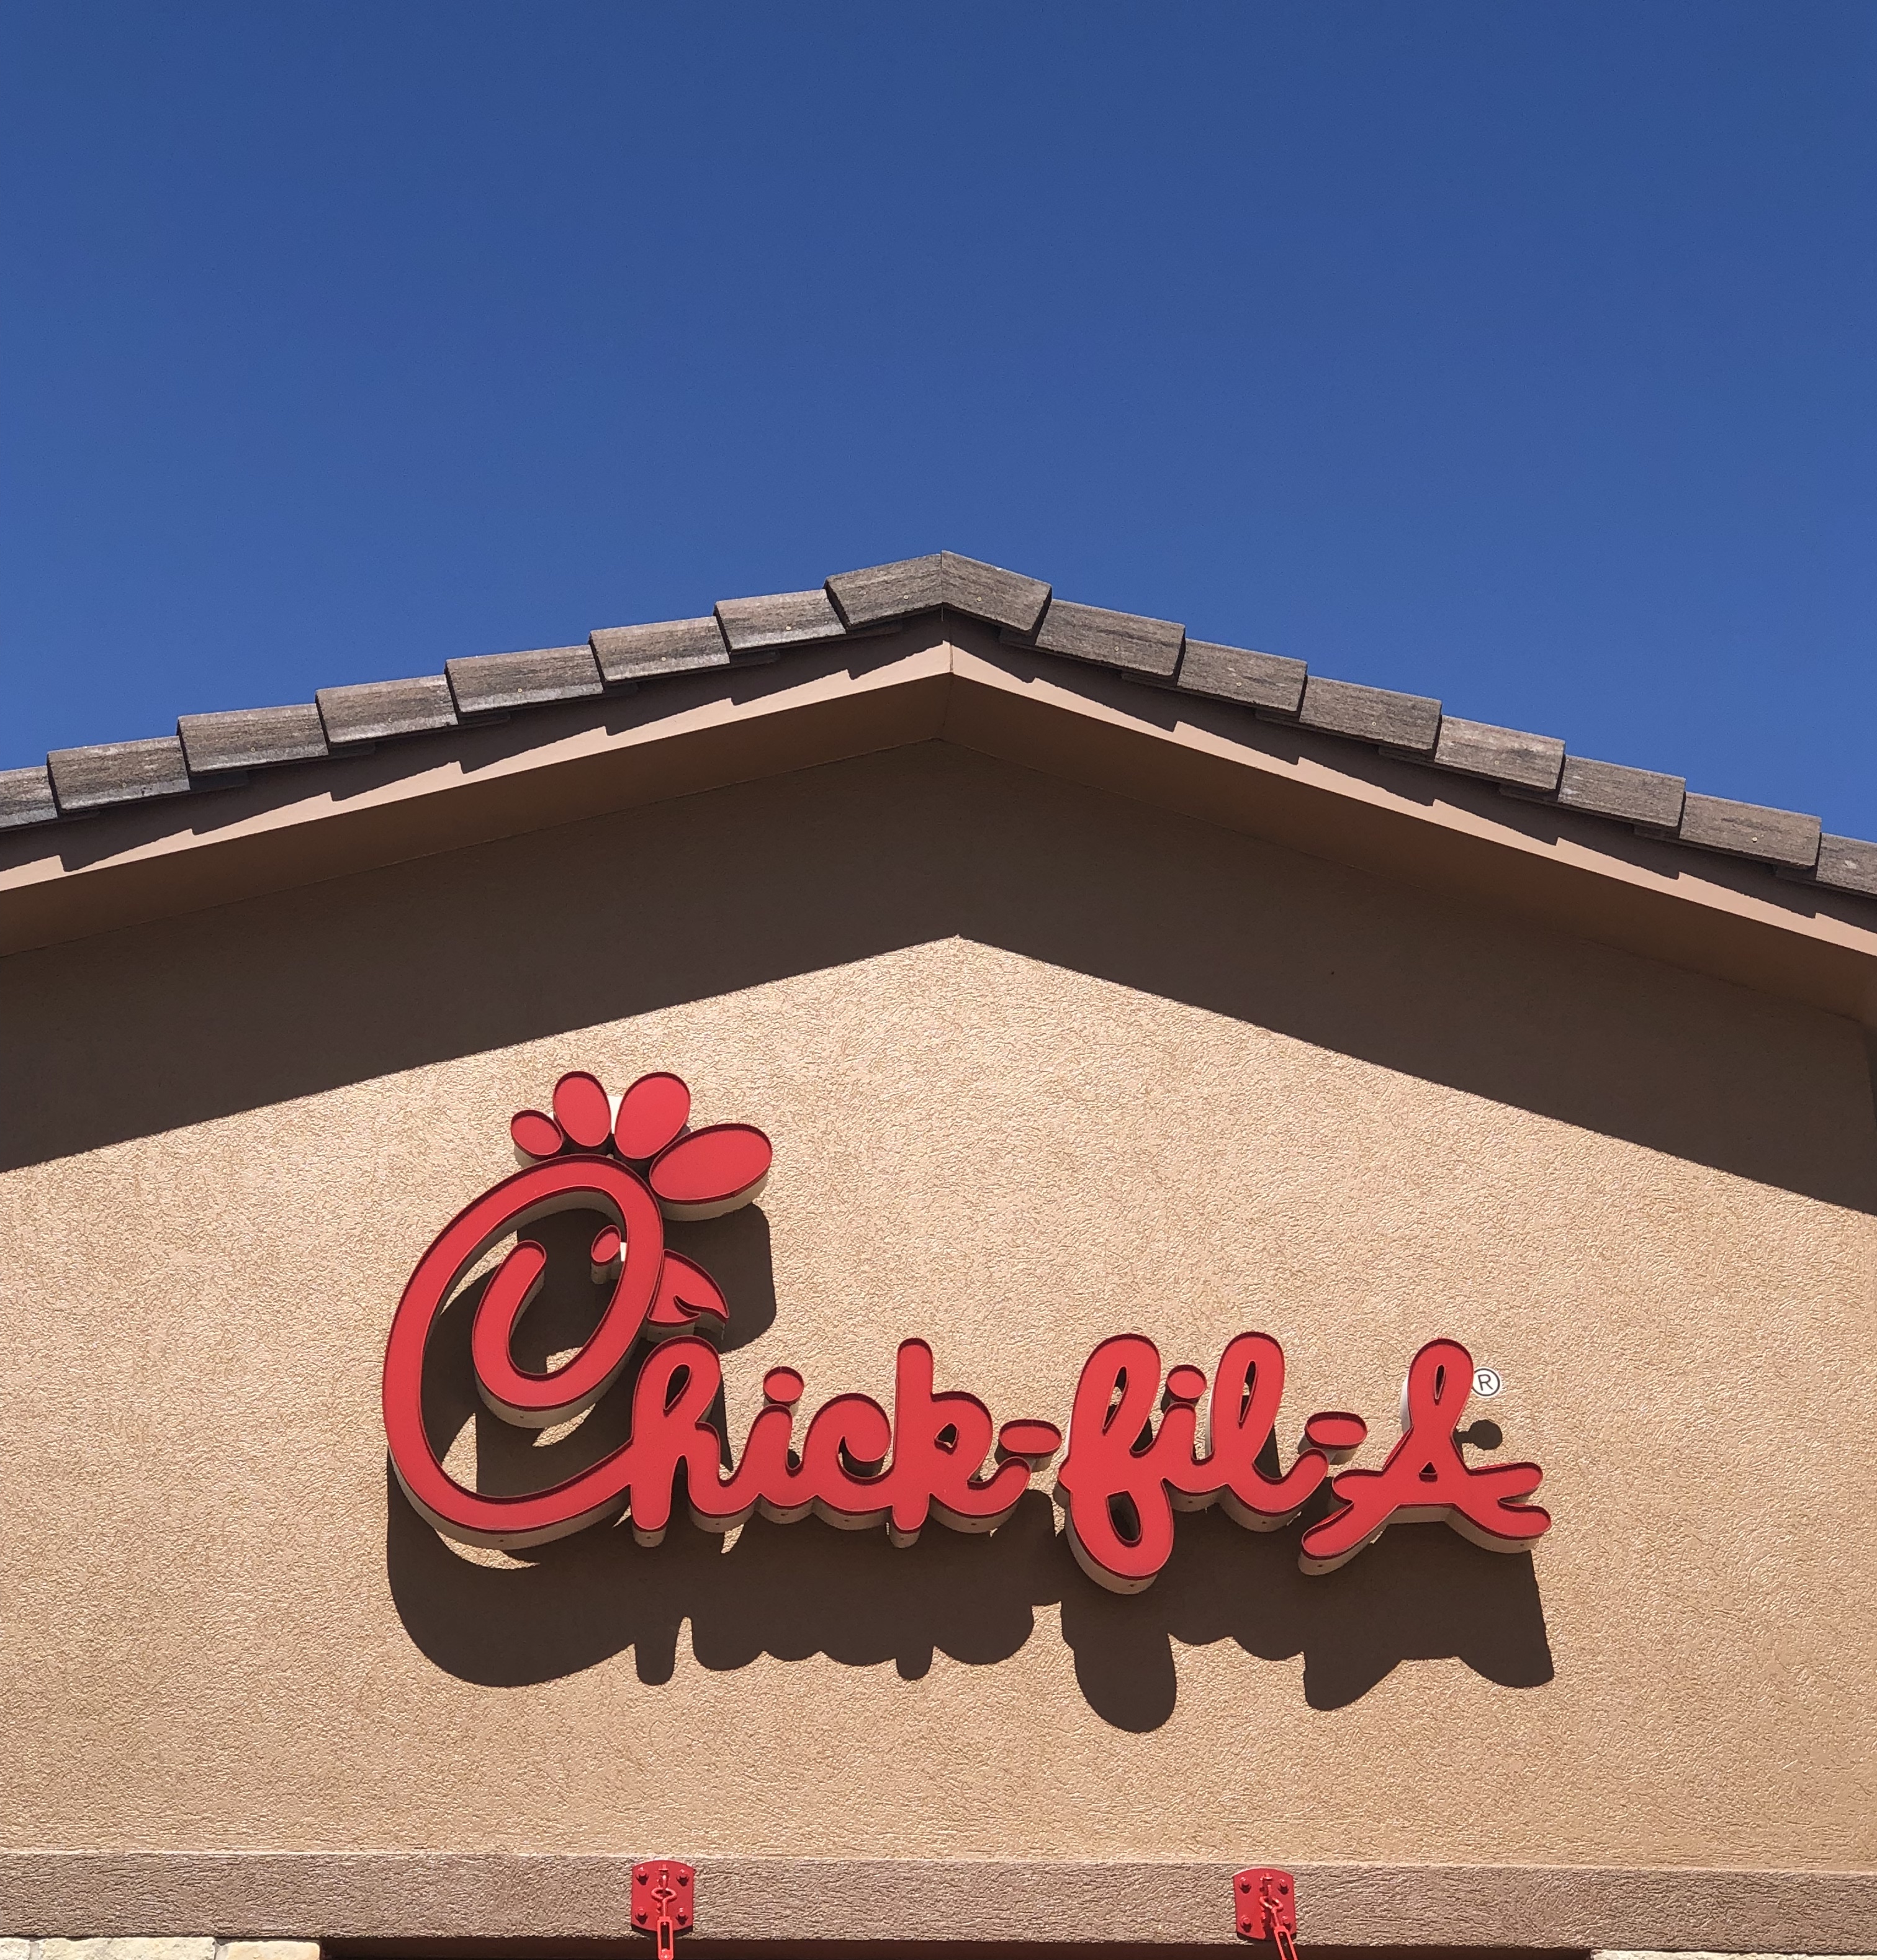 Supply Chain Scene, image of a Chick-fil-A store sign with blue sky background 